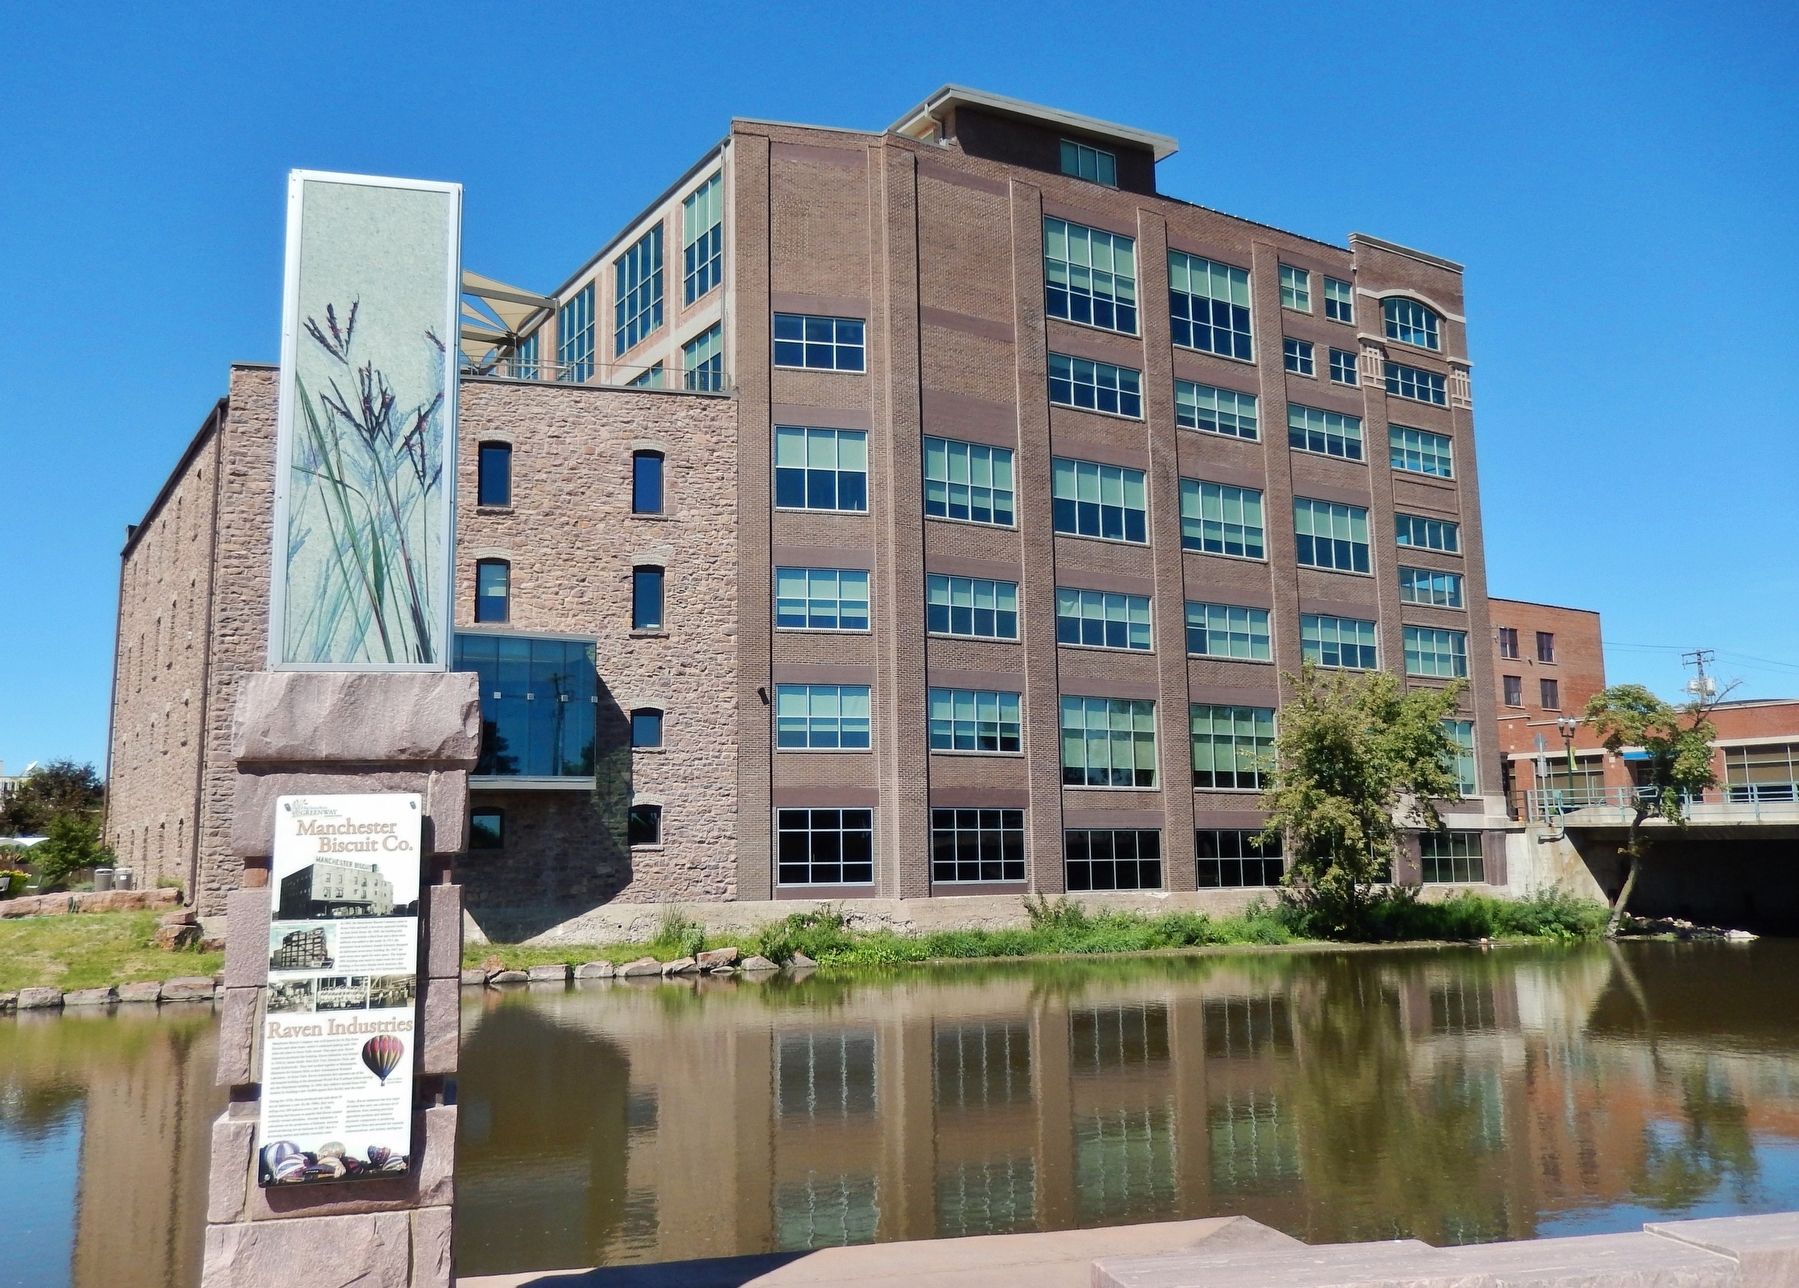 Raven Industries Marker (<i>wide view; Raven Industries building across river, in background</i>) image. Click for full size.